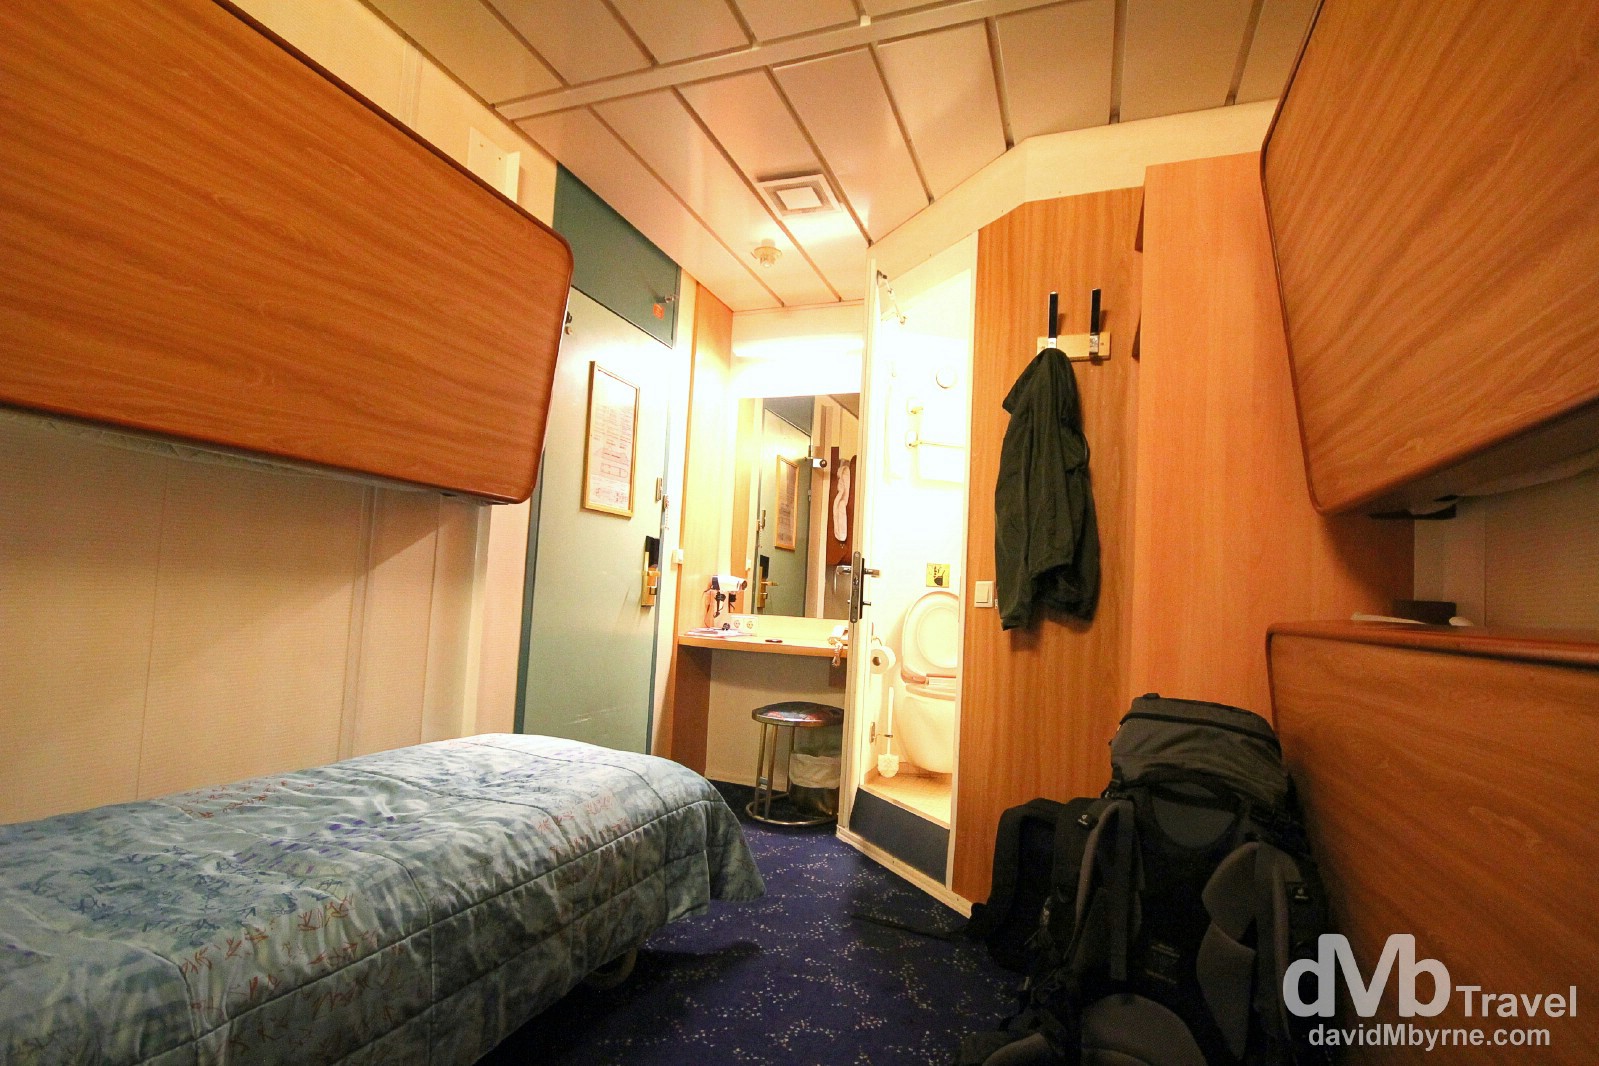 Male only cabin 2010 on deck 2 of the Silja Line Symphony. Room for 4 but made up only for 1 – me. On the ferry from Helsinki, Finland to Stockholm, Sweden. November 25th 2012.